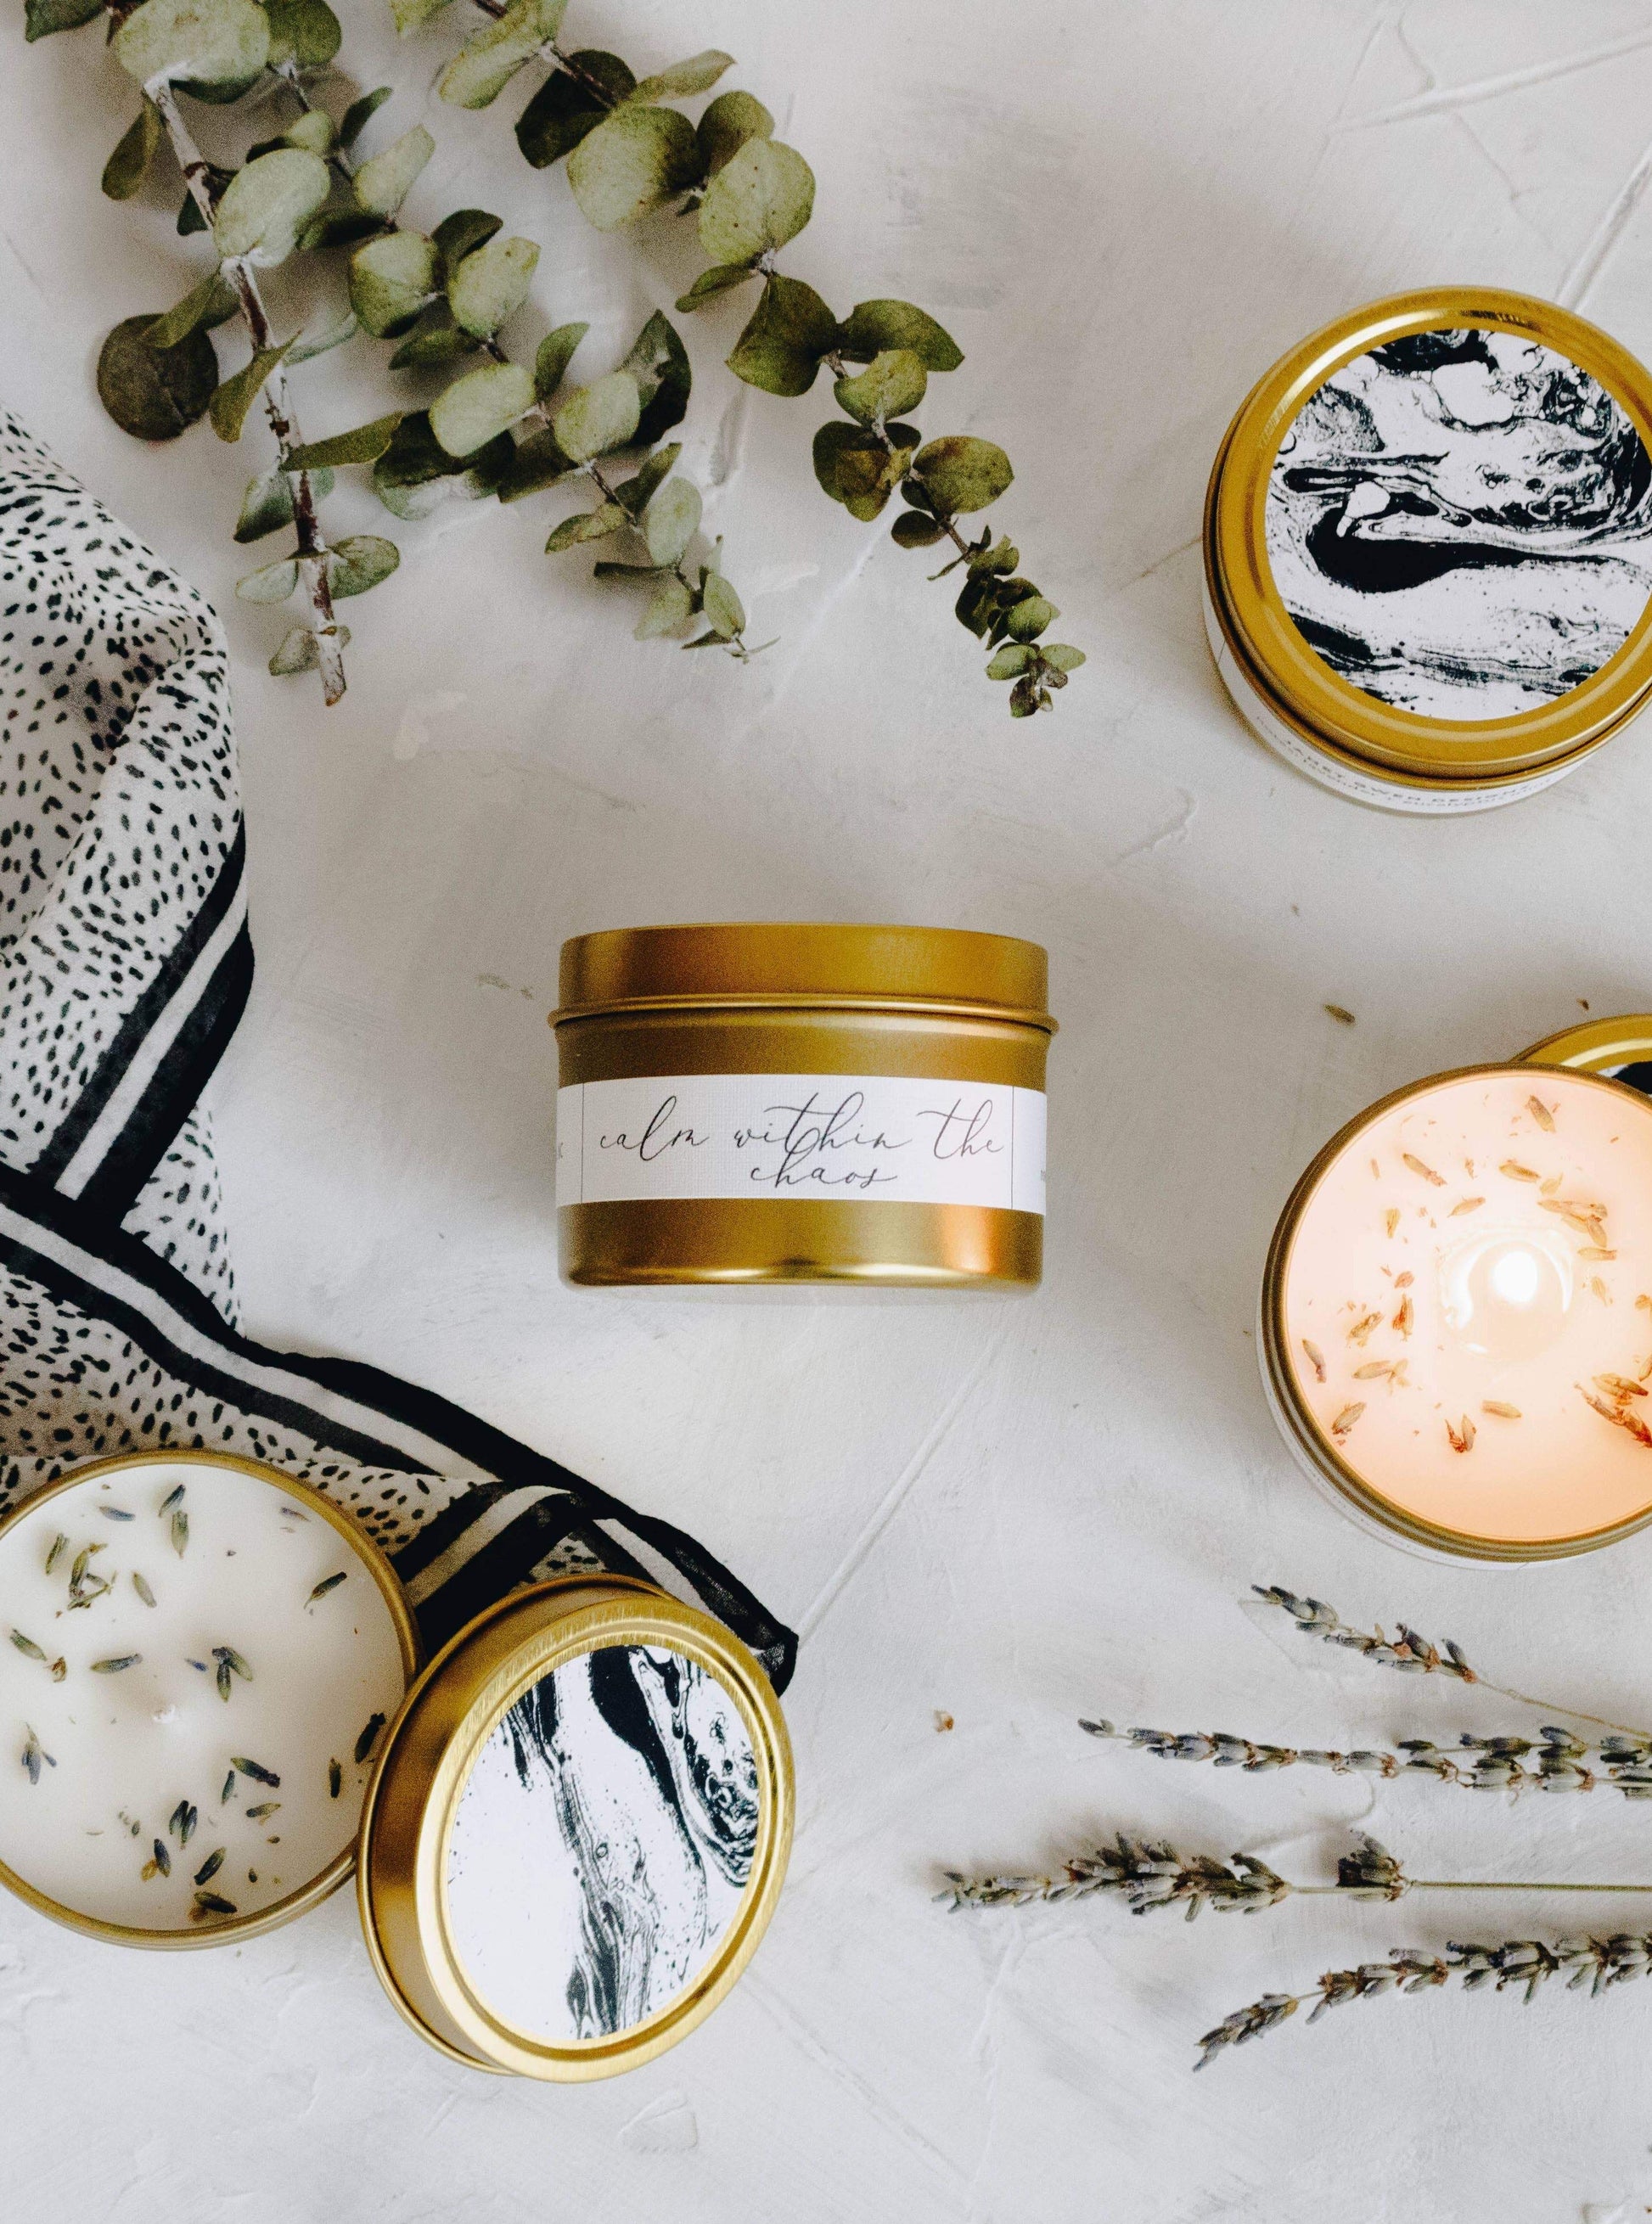 Calm Within The Chaos Mini Soy Candle Home & Lifestyle